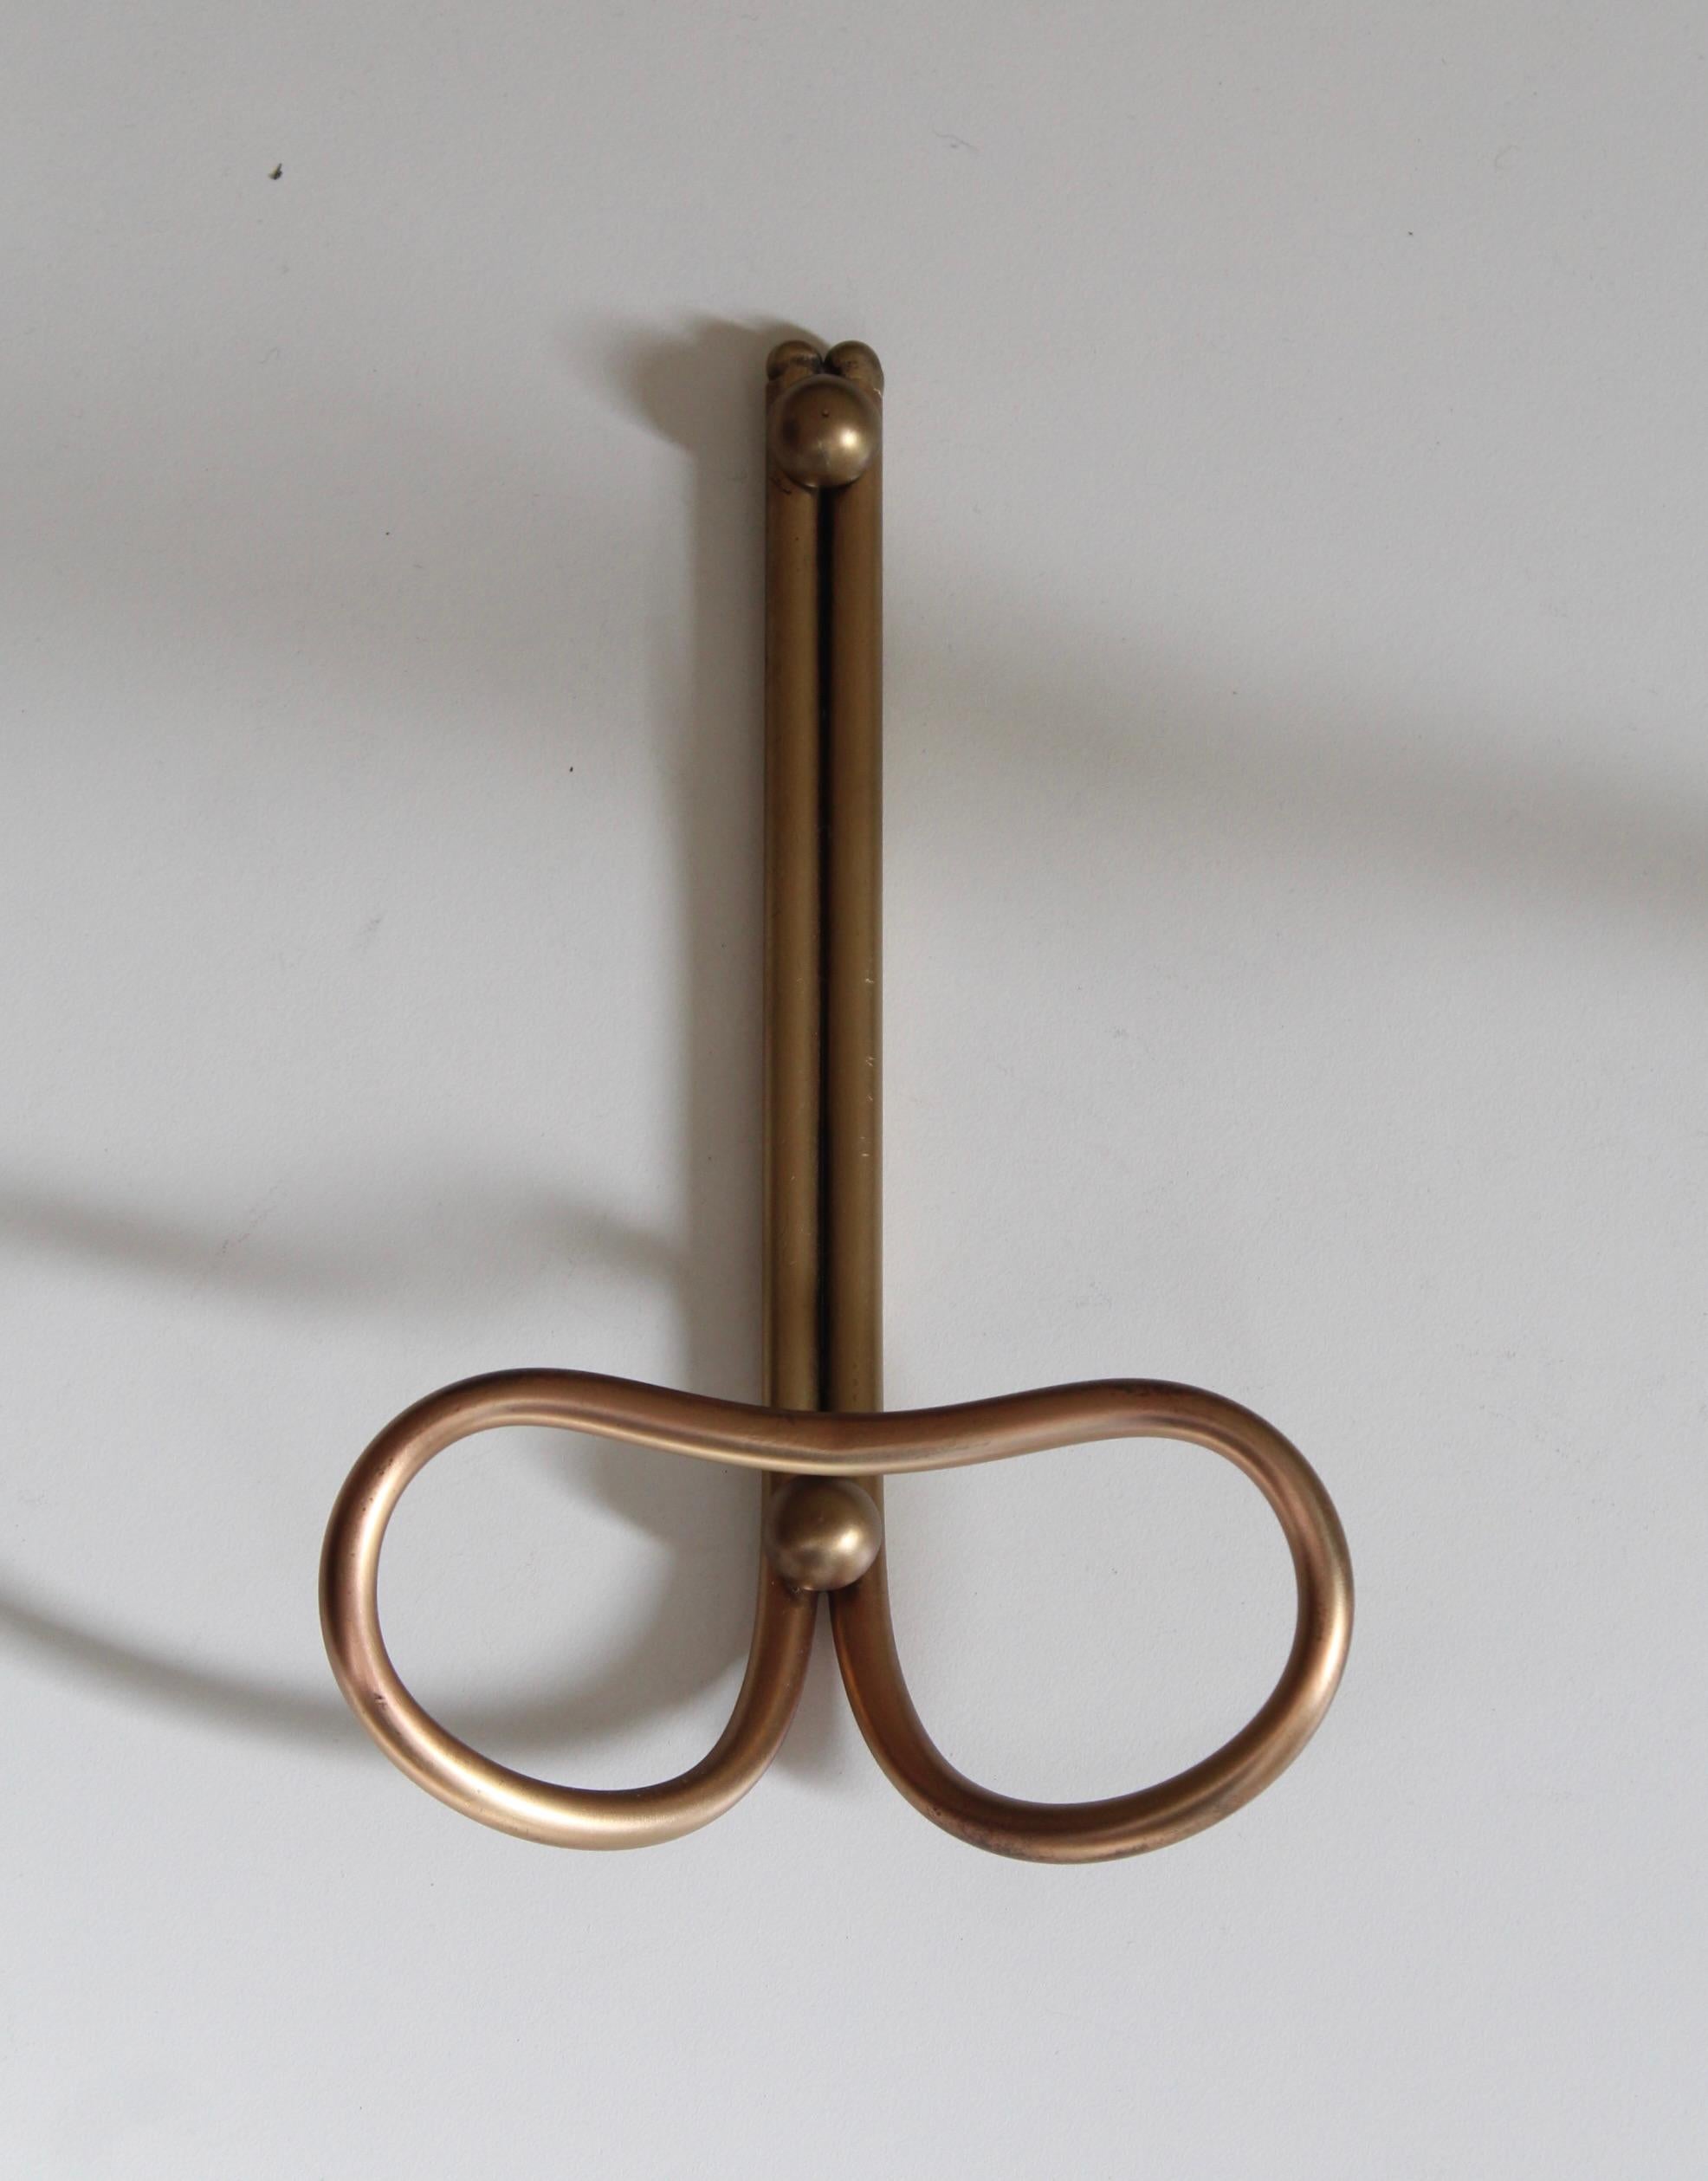 A pair of brass coat hangers, designed and produced by an Italian designer, Italy, 1940s.